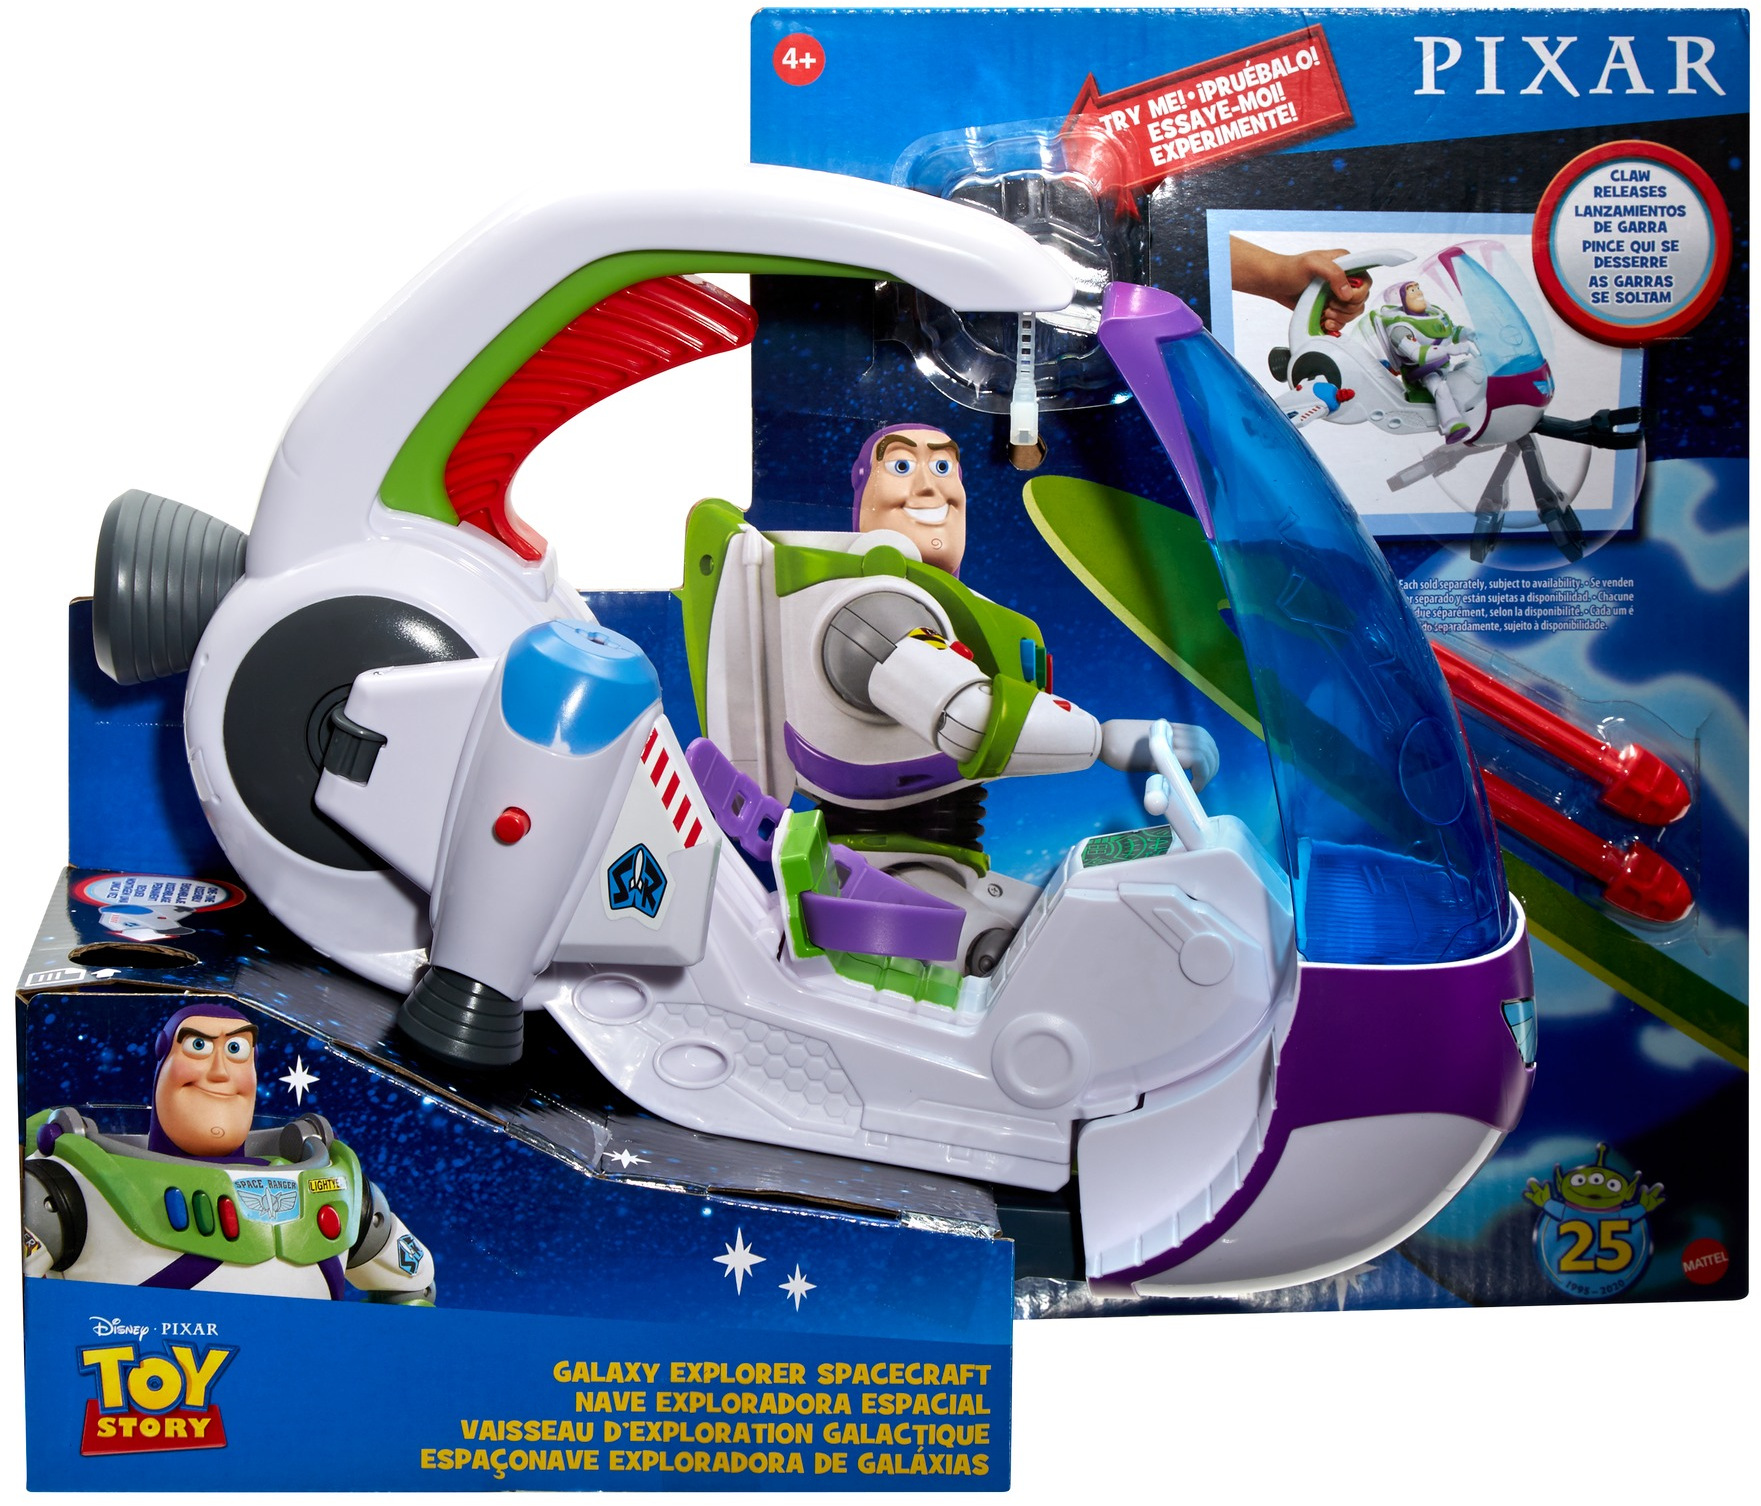 Disney Pixar Toy Story Galaxy Explorer Spacecraft Toy Vehicle For 4 Year Olds & Up - image 3 of 6